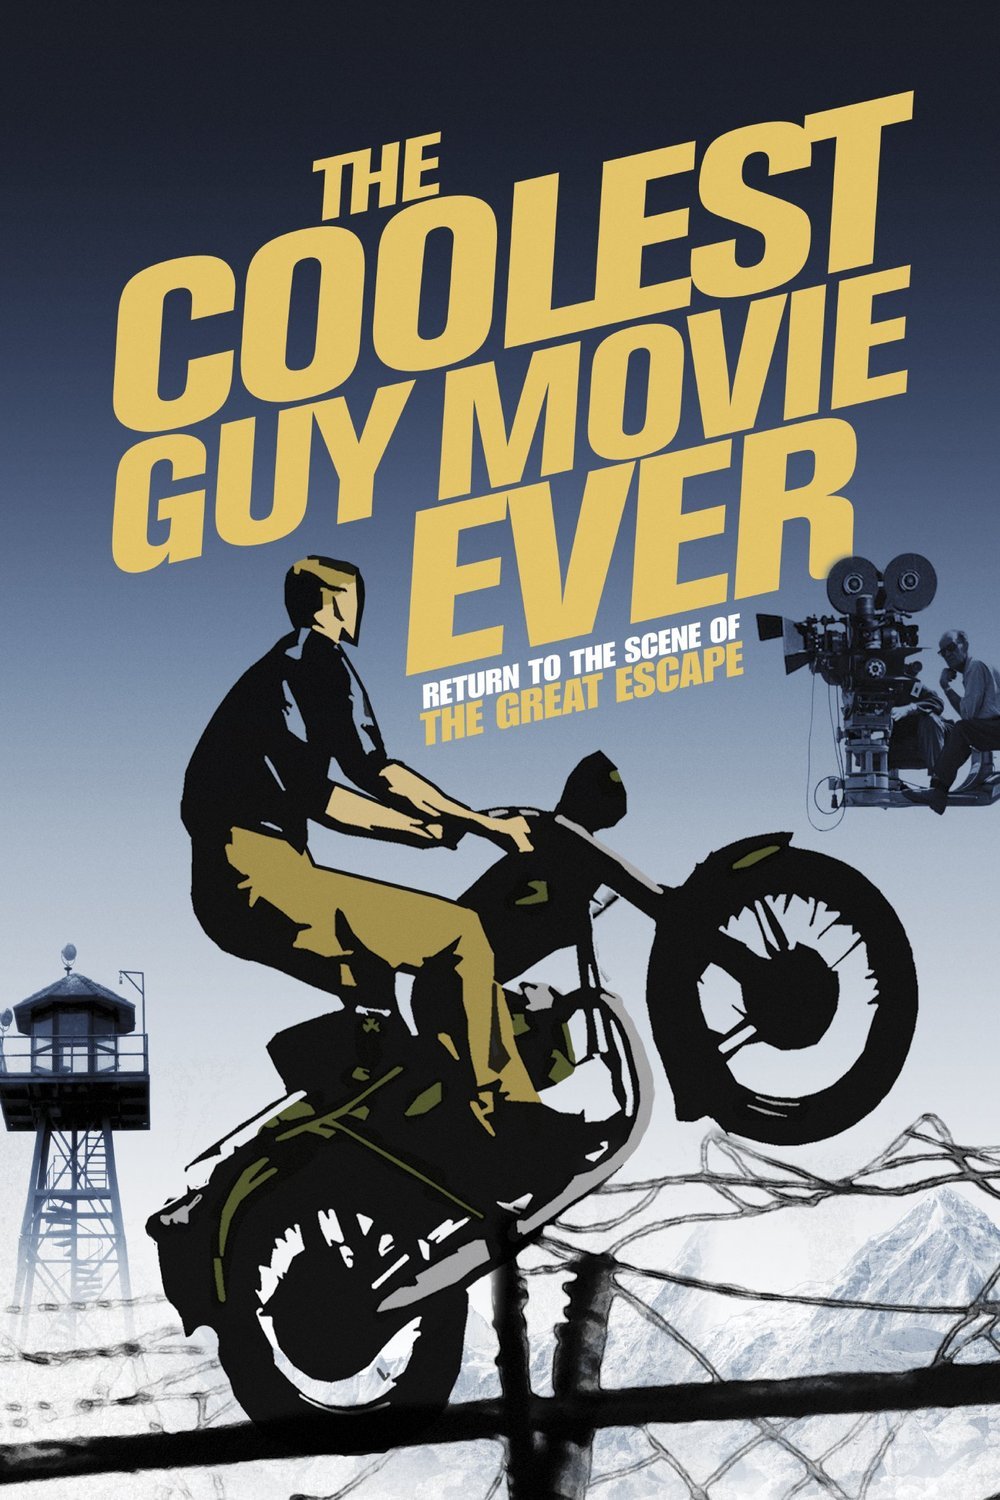 L'affiche du film The Coolest Guy Movie Ever: Return to the Scene of the Great Escape